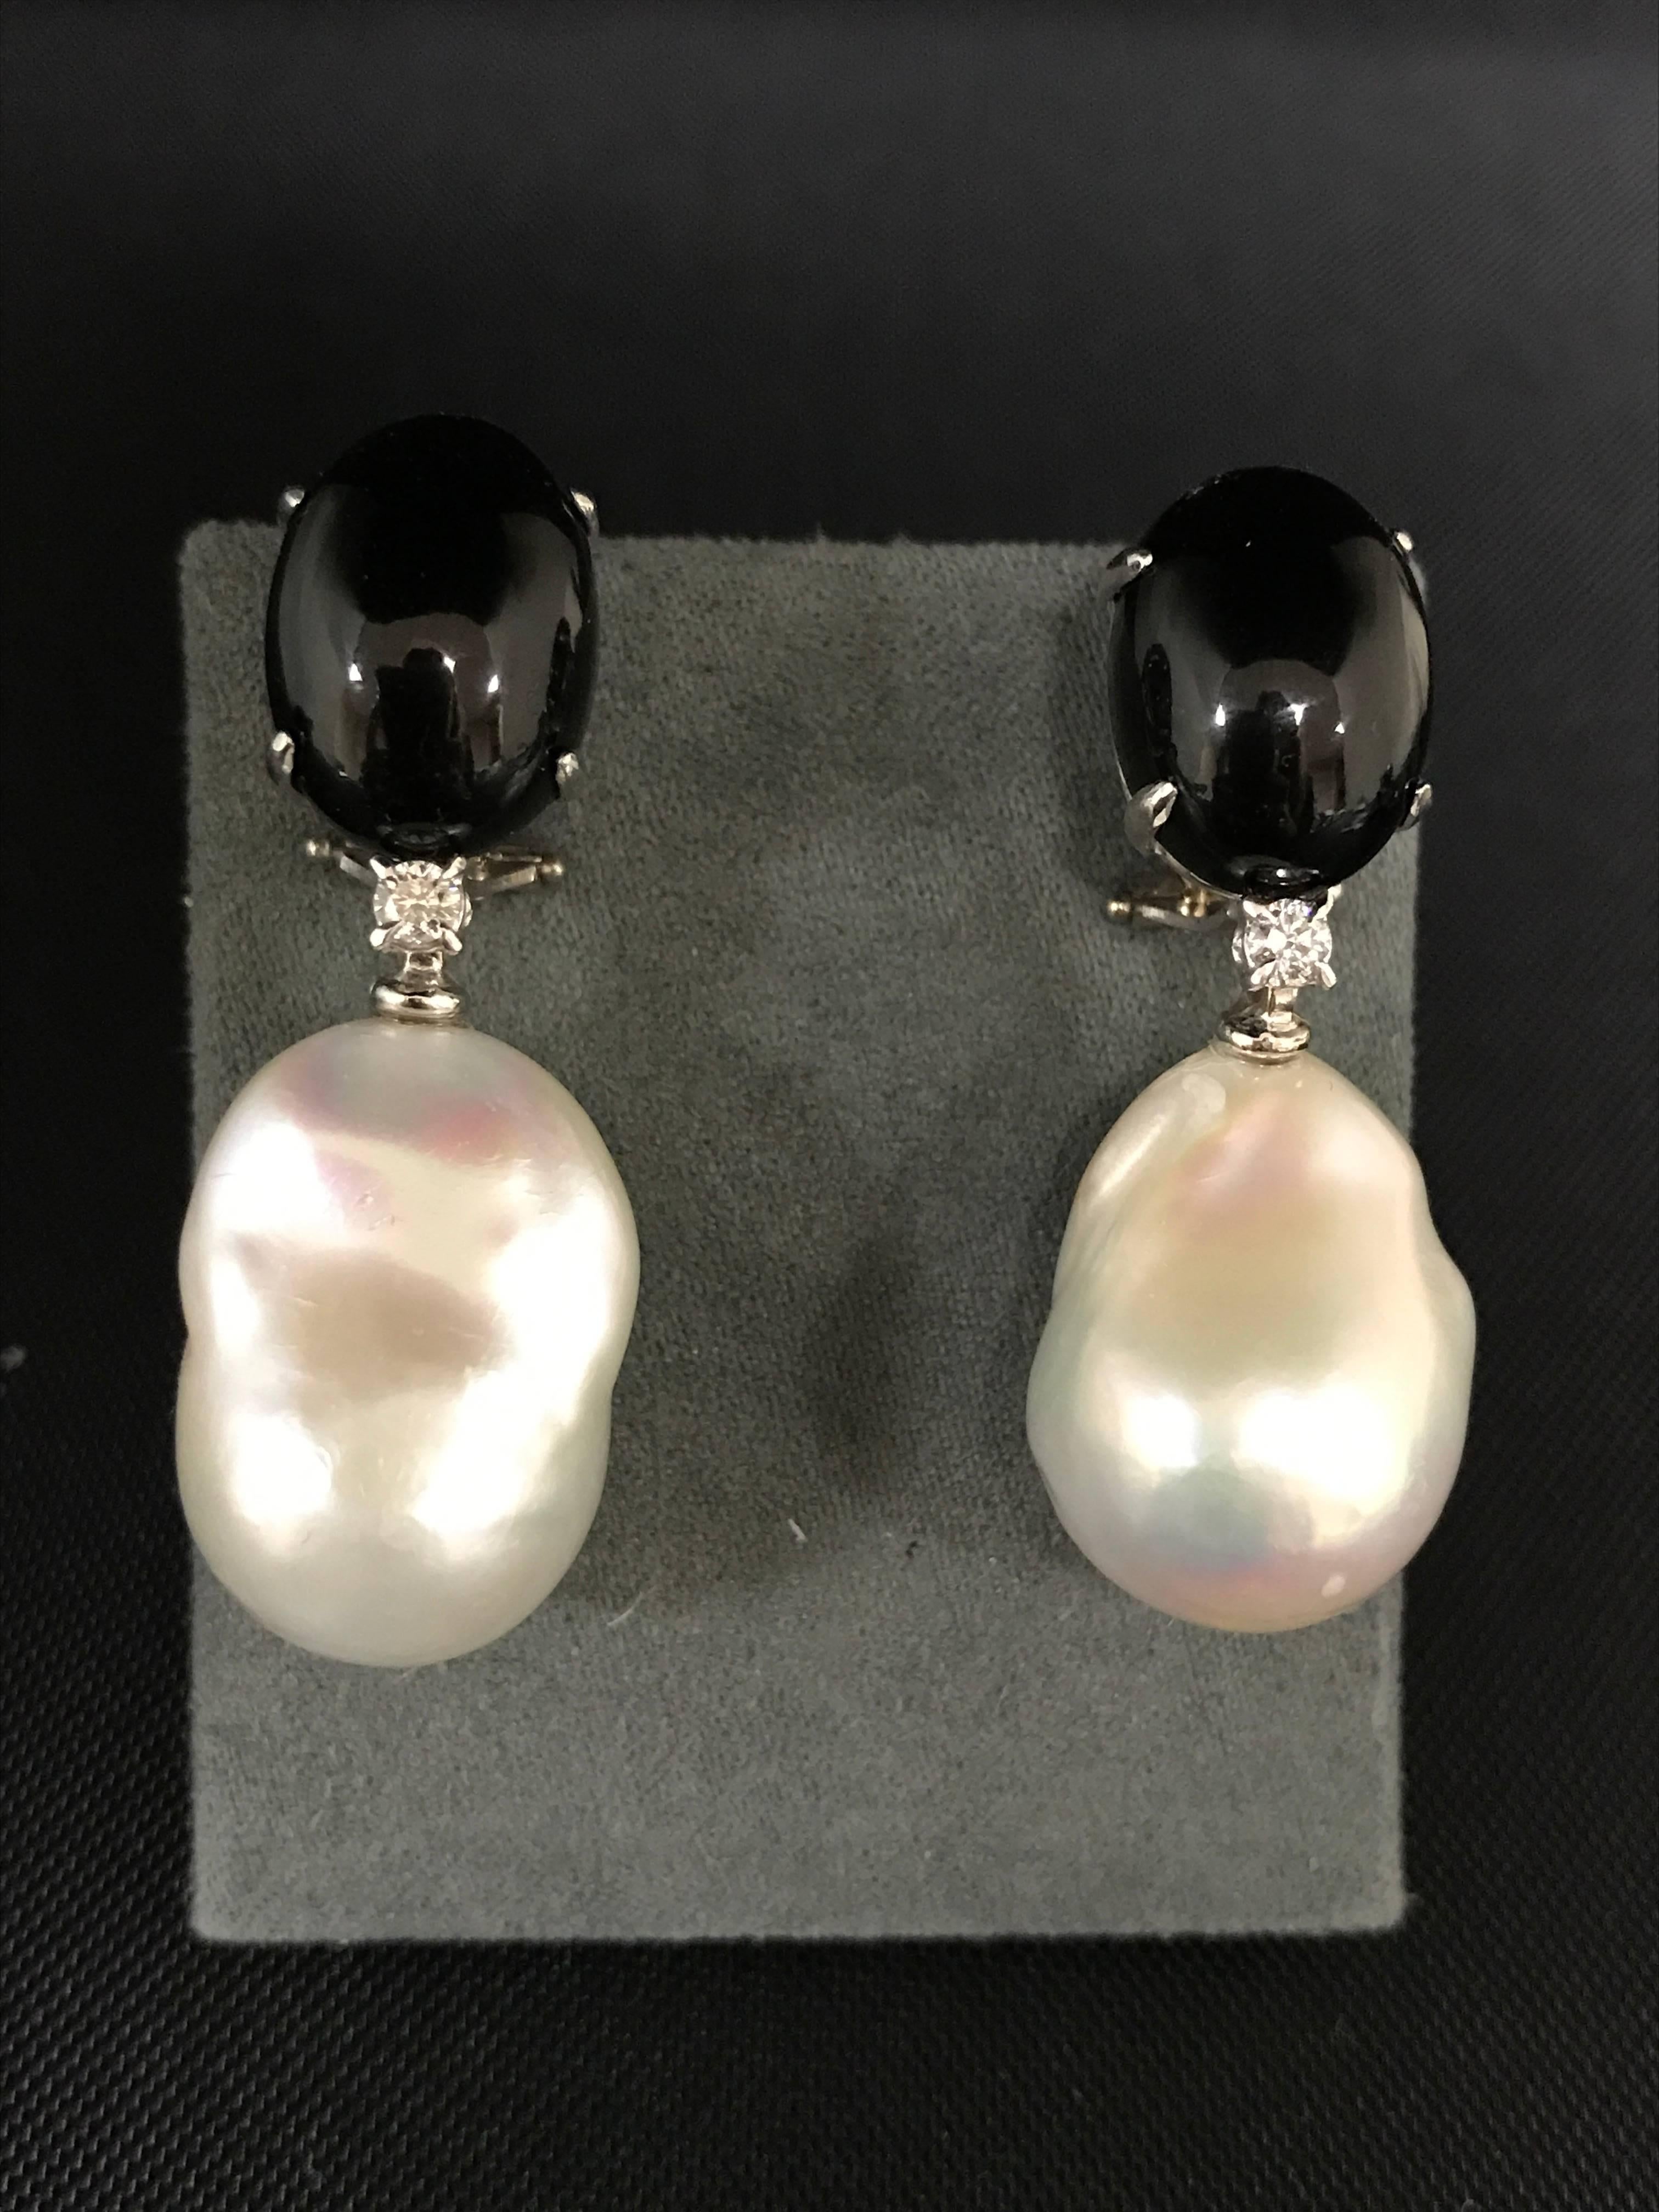 Discover this Black Agate and Diamond White Gold Chandelier Earrings
Beautiful Black Agathe 
Diamonds 0,16
Pearls
White Gold 18 Carat